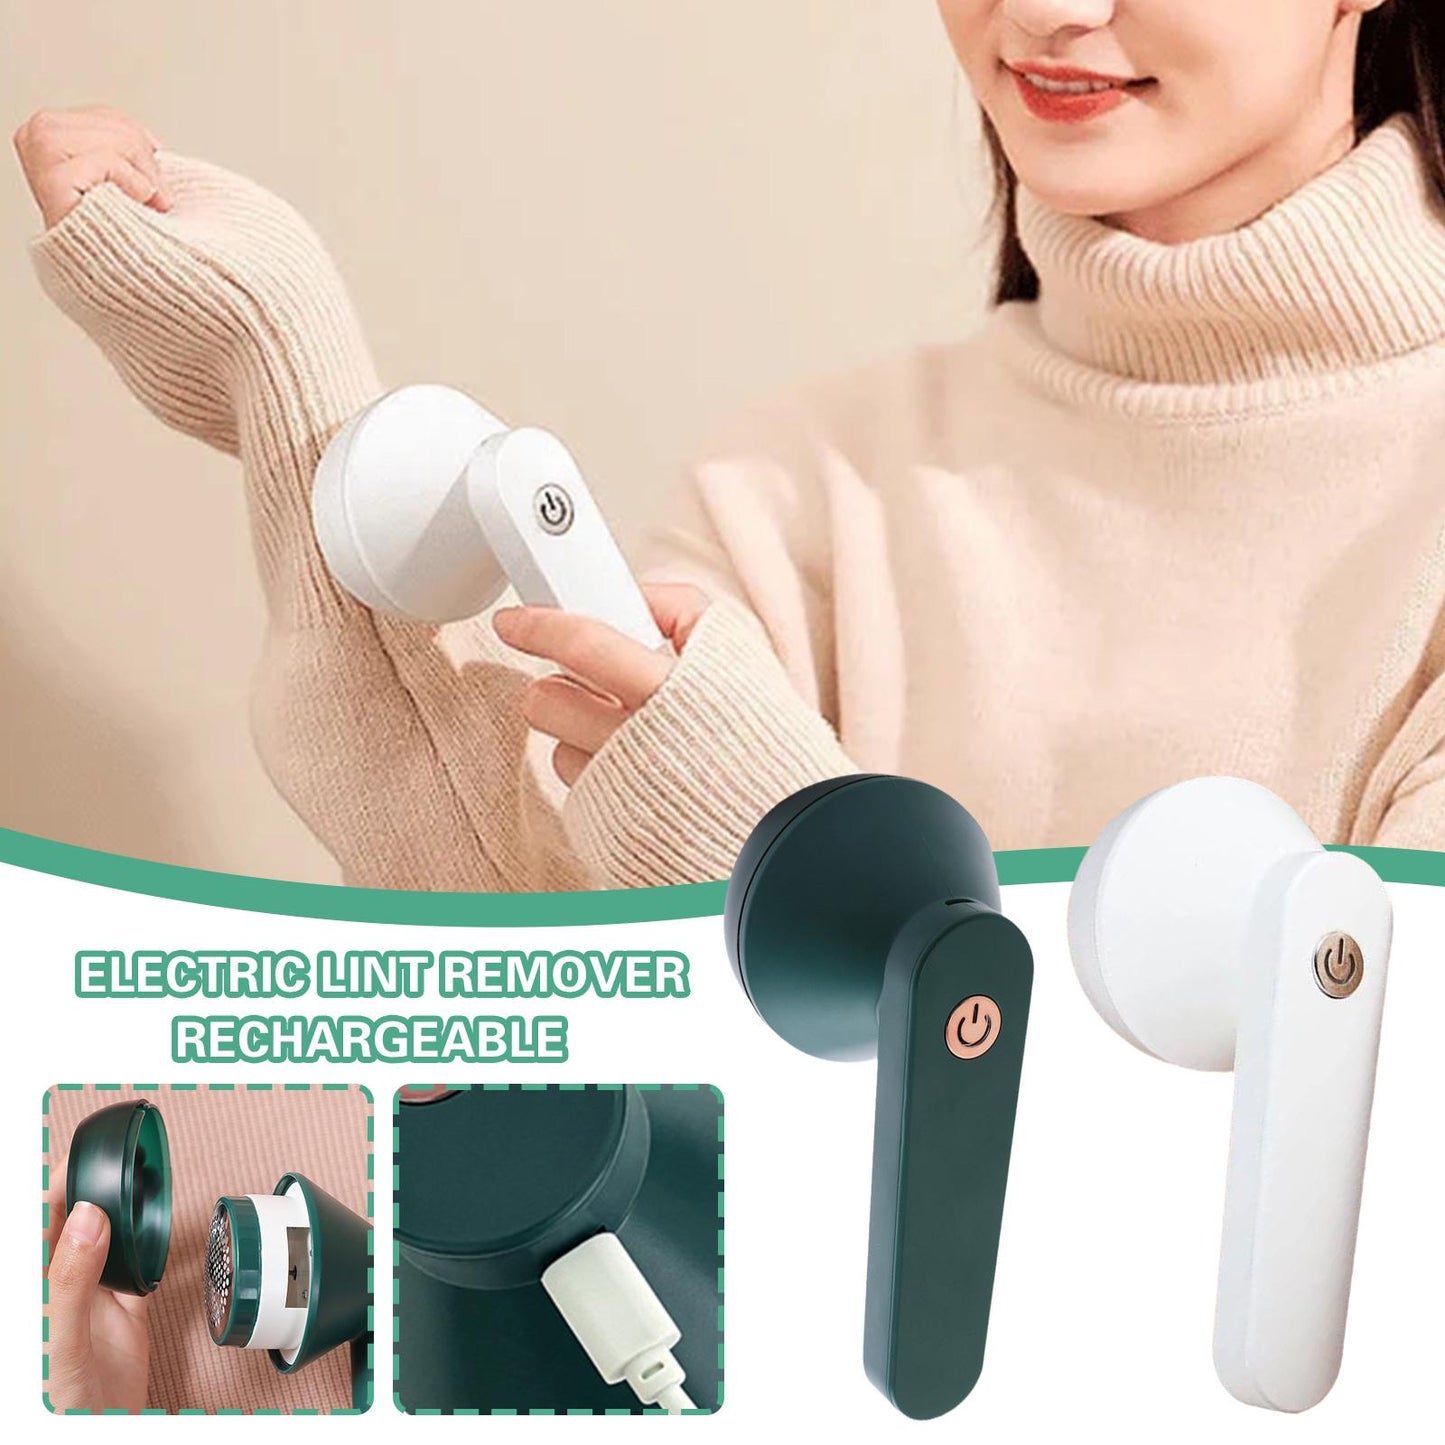 Electric Lint Remover (Premium Quality)